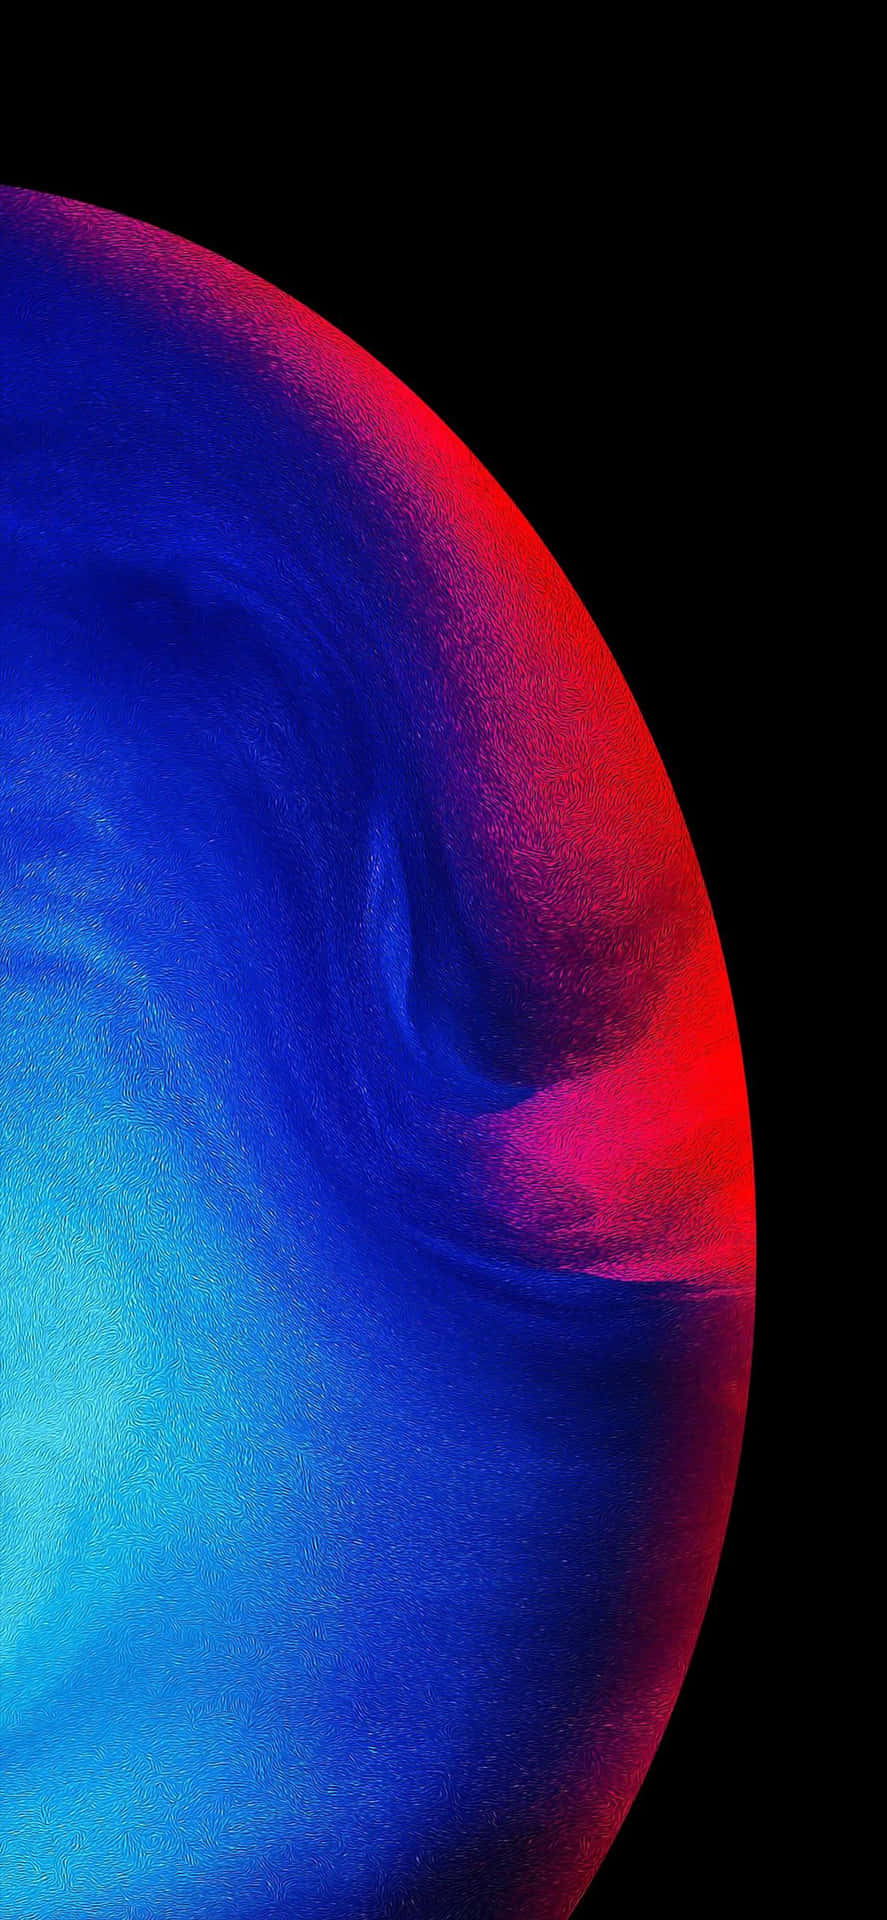 A Blue And Red Swirl